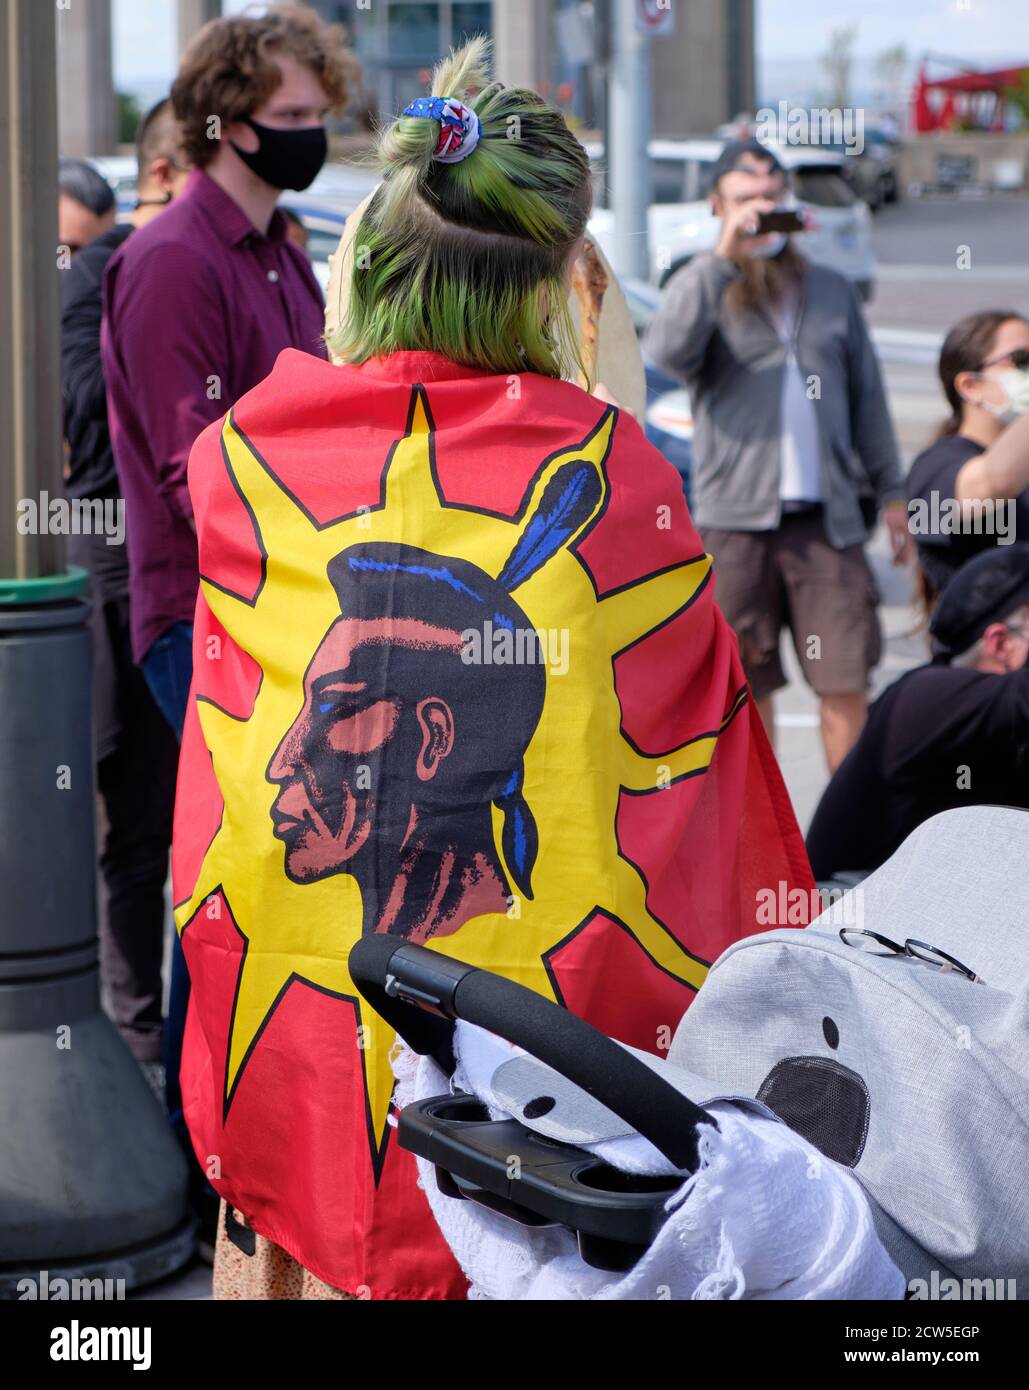 First Nations  woman at protest outside Canadian Senate wrapped in warrior flag, seen from behind Stock Photo